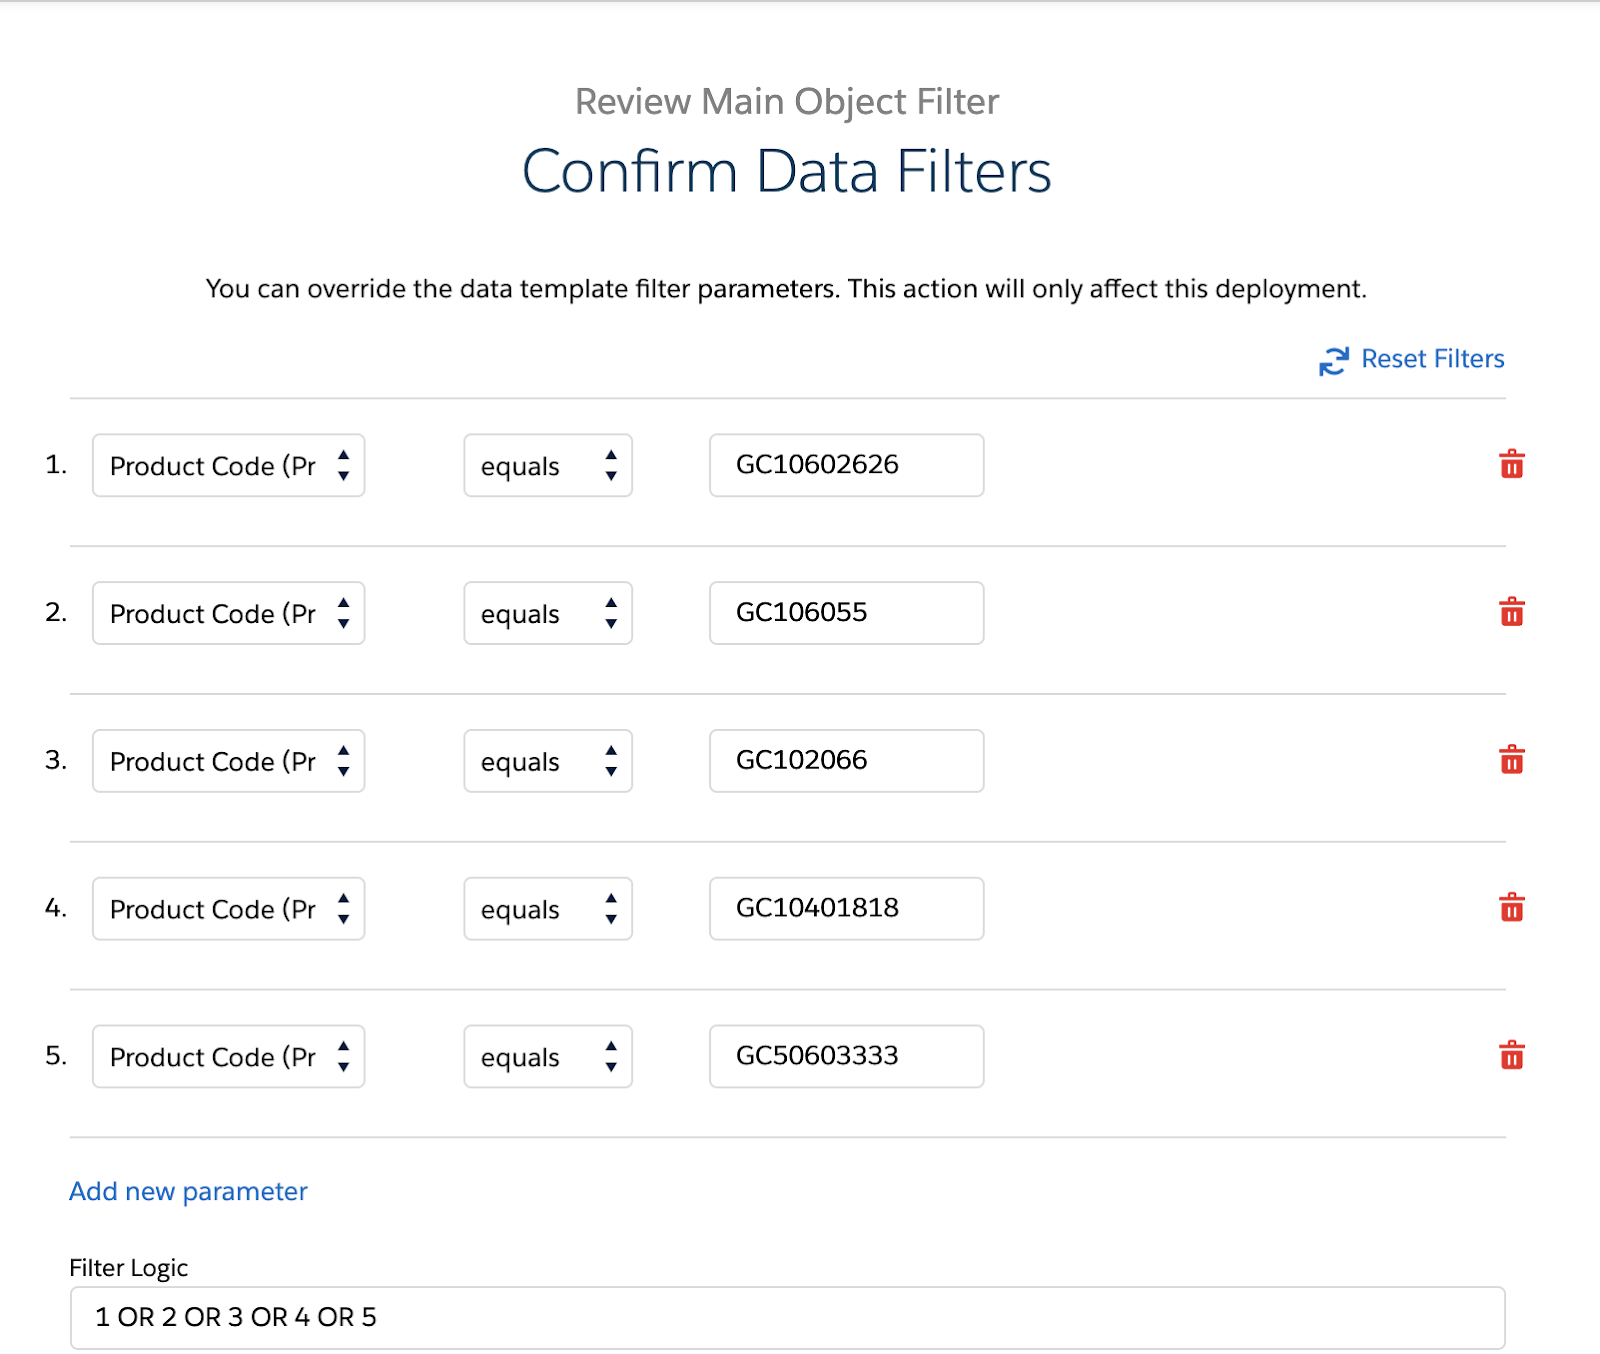 Data filters confirmation screen